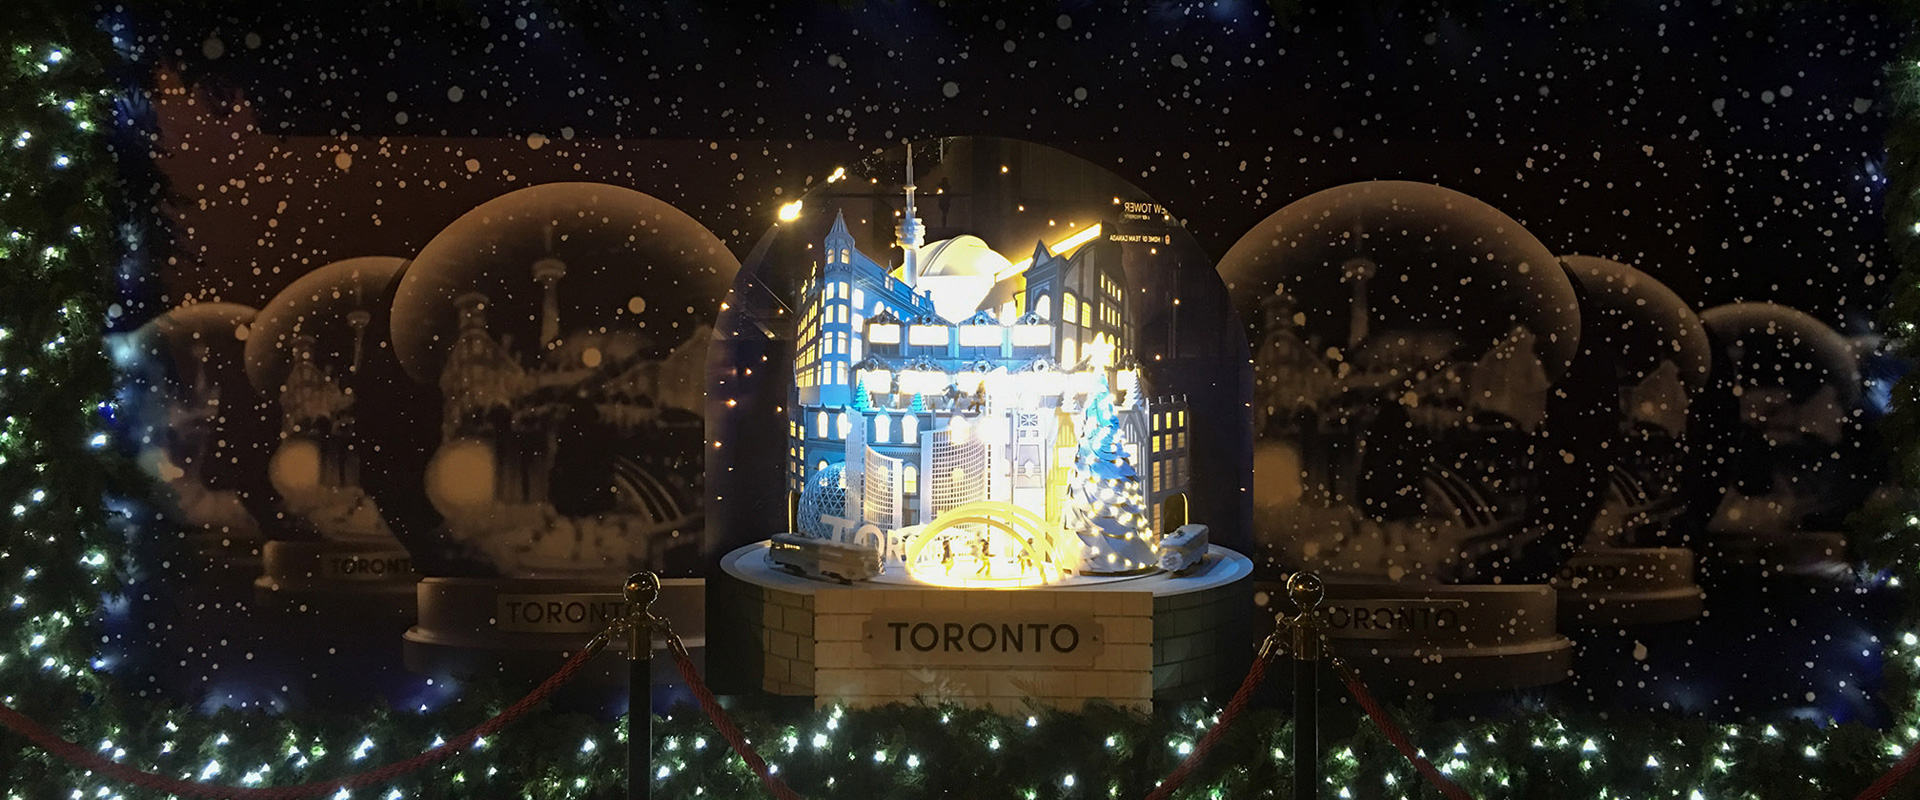 Hudson’s Bay Iconic Christmas Window Display Designs - Central Station